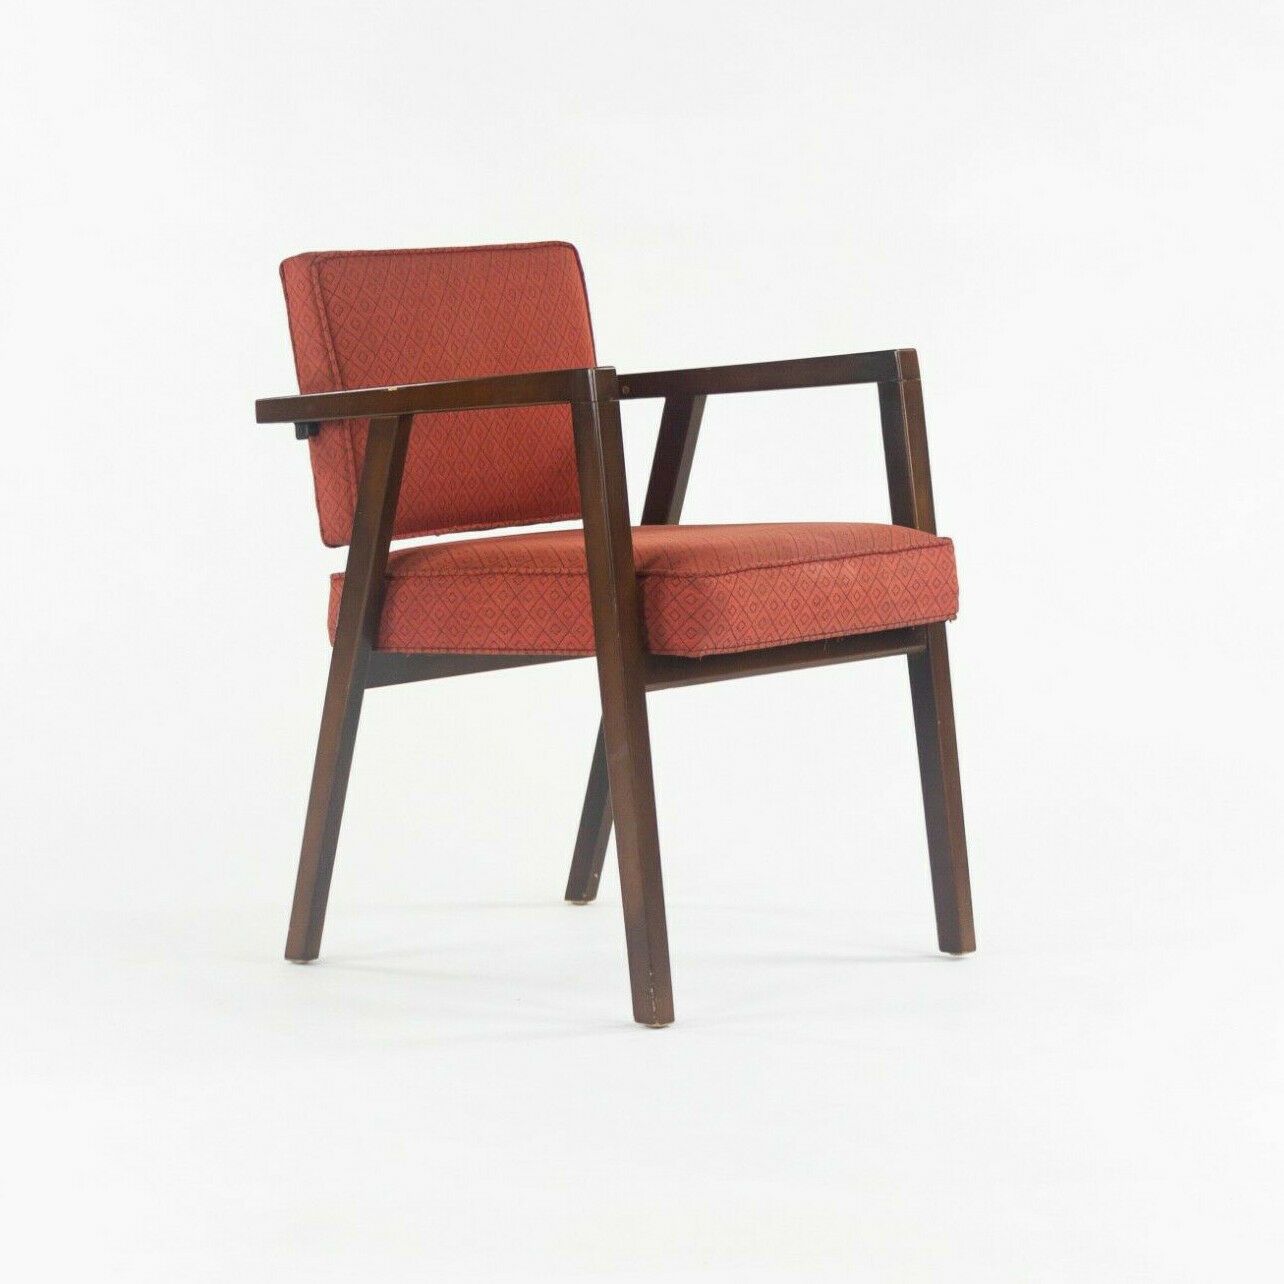 No. 48 Chair